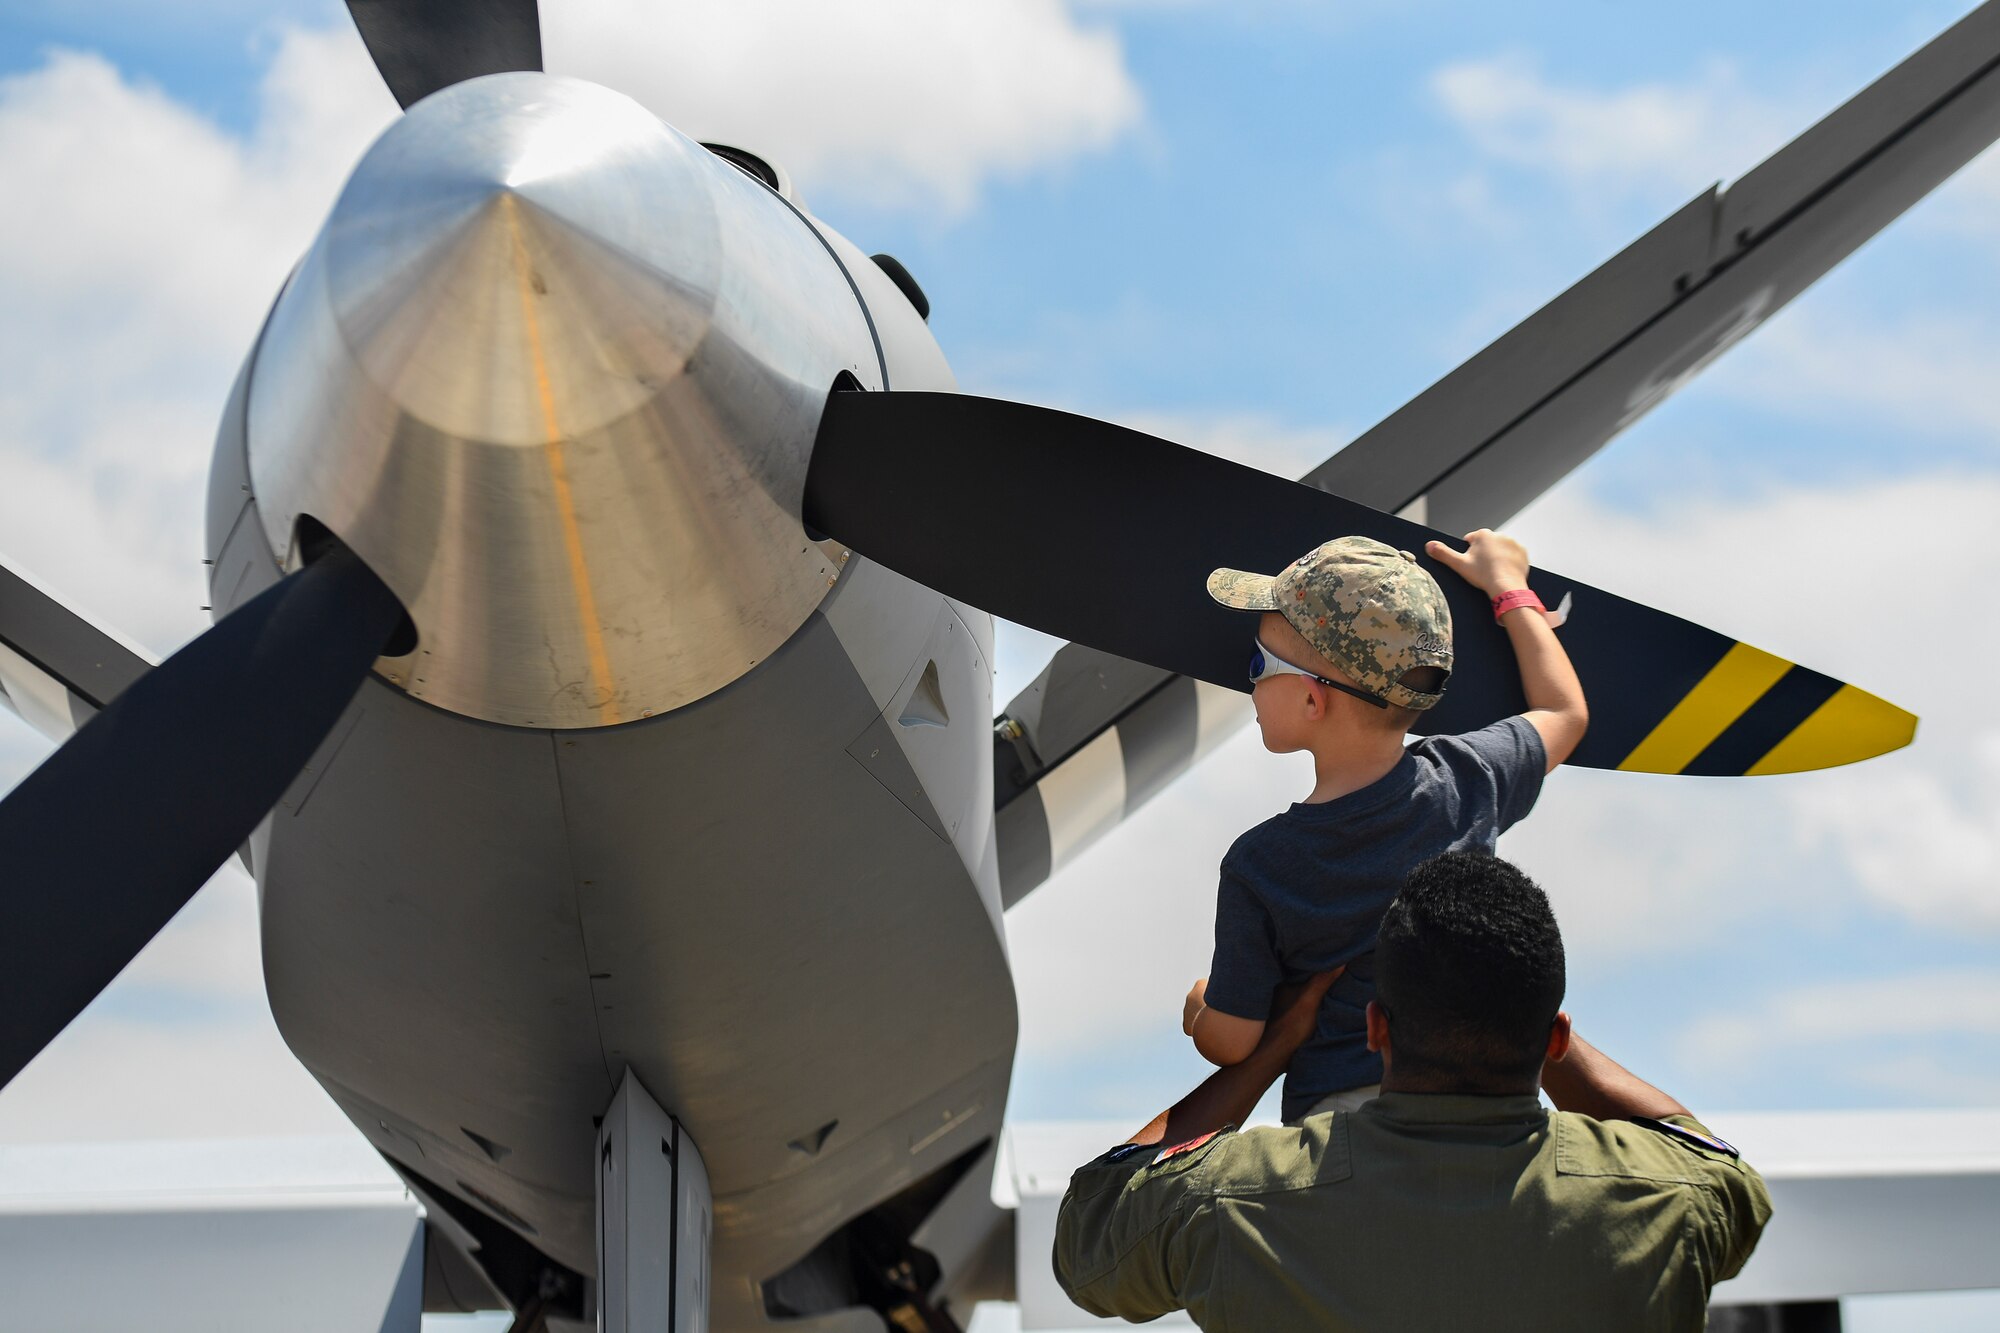 An Airman assigned to the 432nd Wing/432nd Air Expeditionary Wing lifts a child in the air to feel the propeller of the MQ-9 Reaper model during the 2017 Gulf Coast Salute Open House and Air Show April 22, 2017, at Tyndall Air Force Base, Fla. The MQ-9 model stood among other aircraft displays for the first time and provided air show visitors a visual of the MQ-9. (U.S. Air Force photo/Airman 1st Class James Thompson)